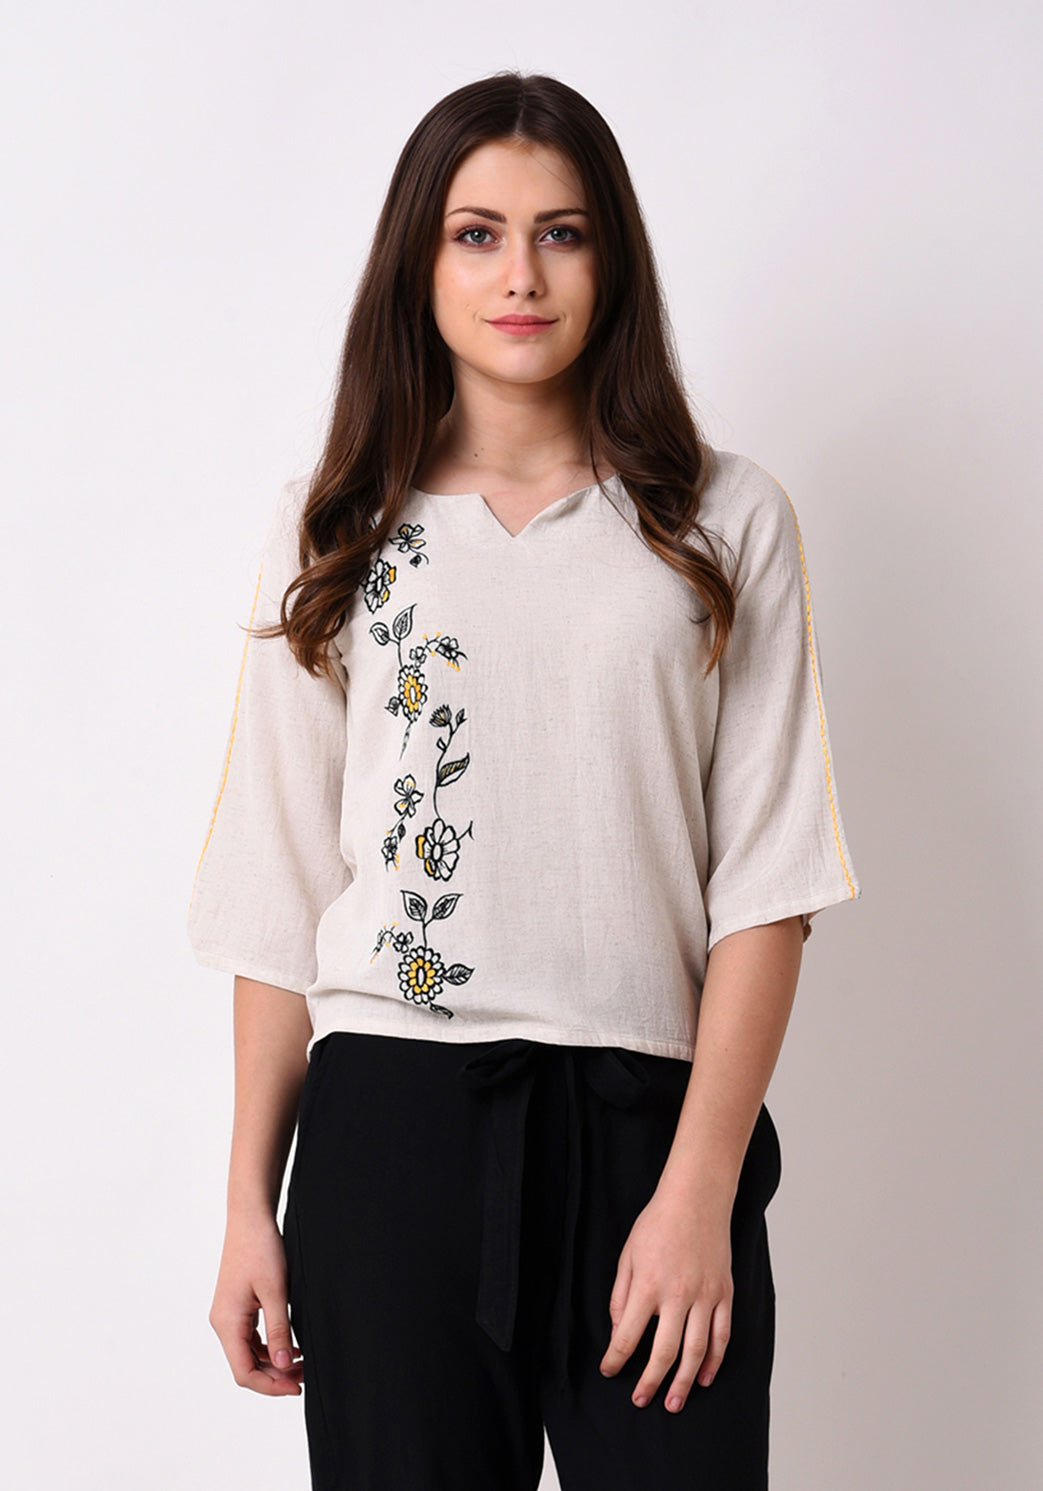 FLORAL EMBROIDERED TOP-View All-TOPS-WOMAN-SALE